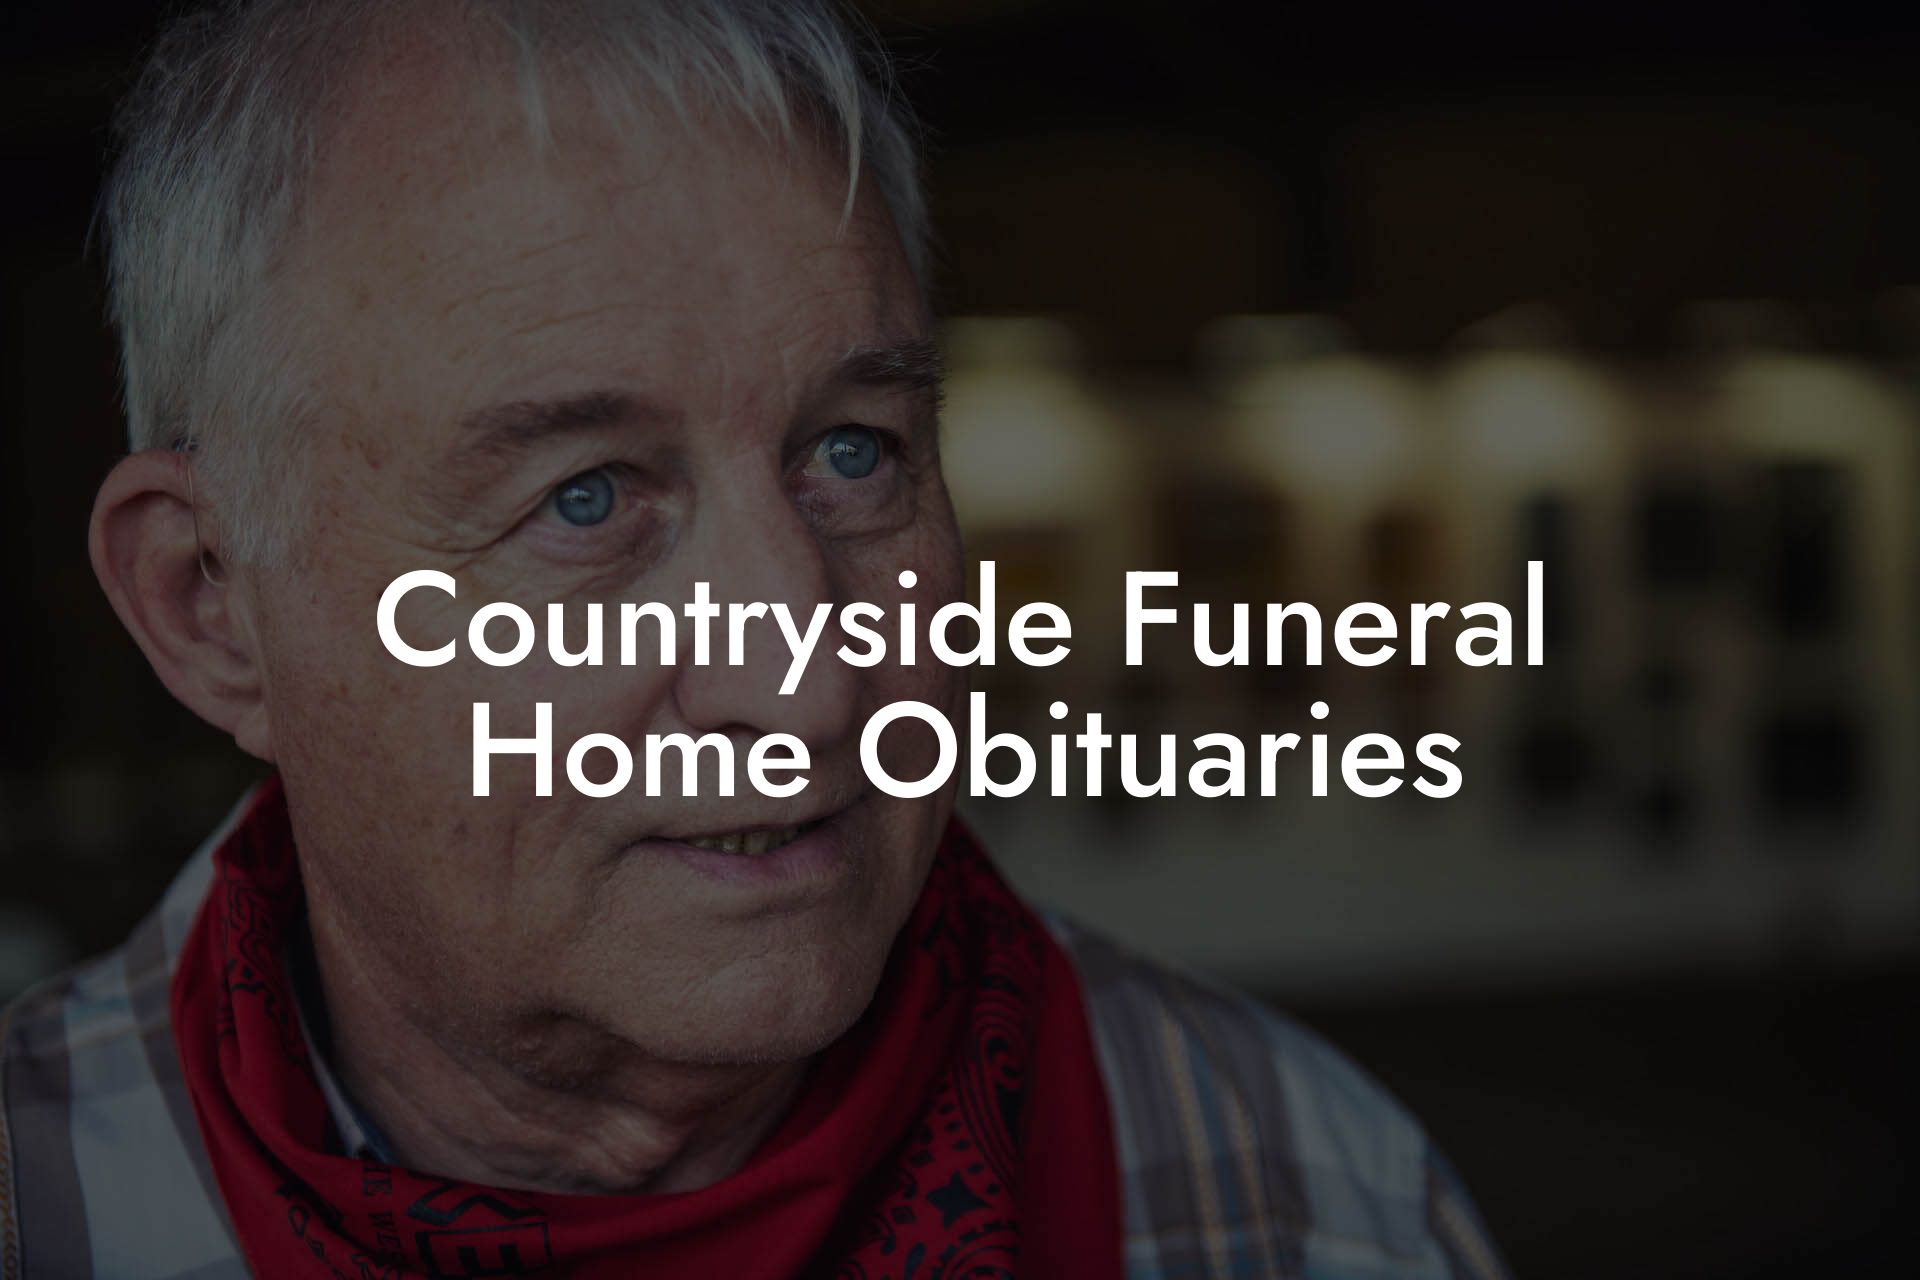 Countryside Funeral Home Obituaries